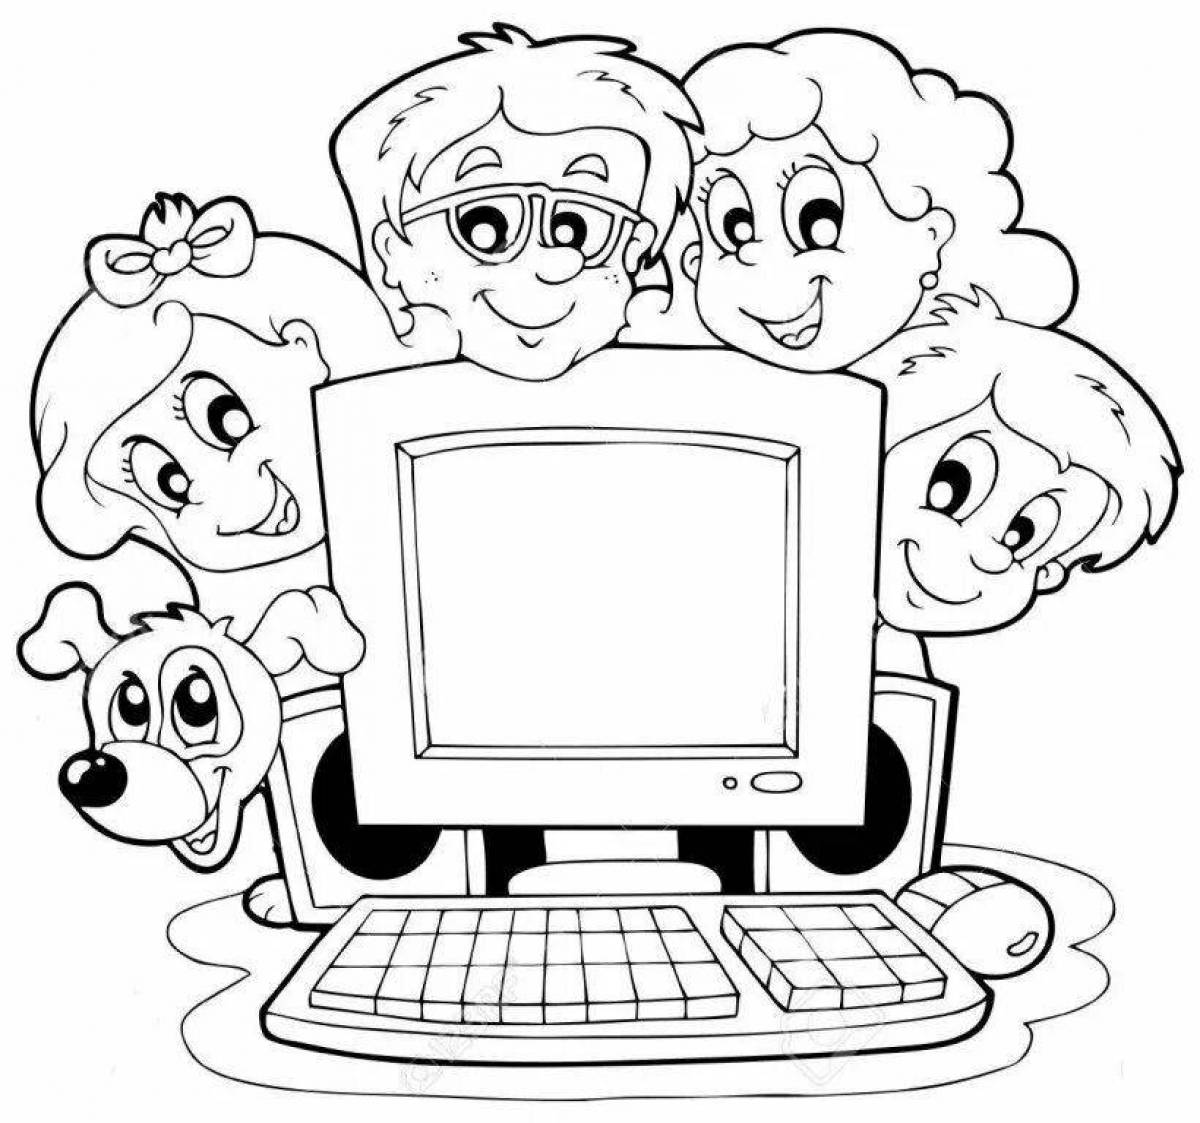 Safe Internet Fun Coloring Page for Elementary School Children